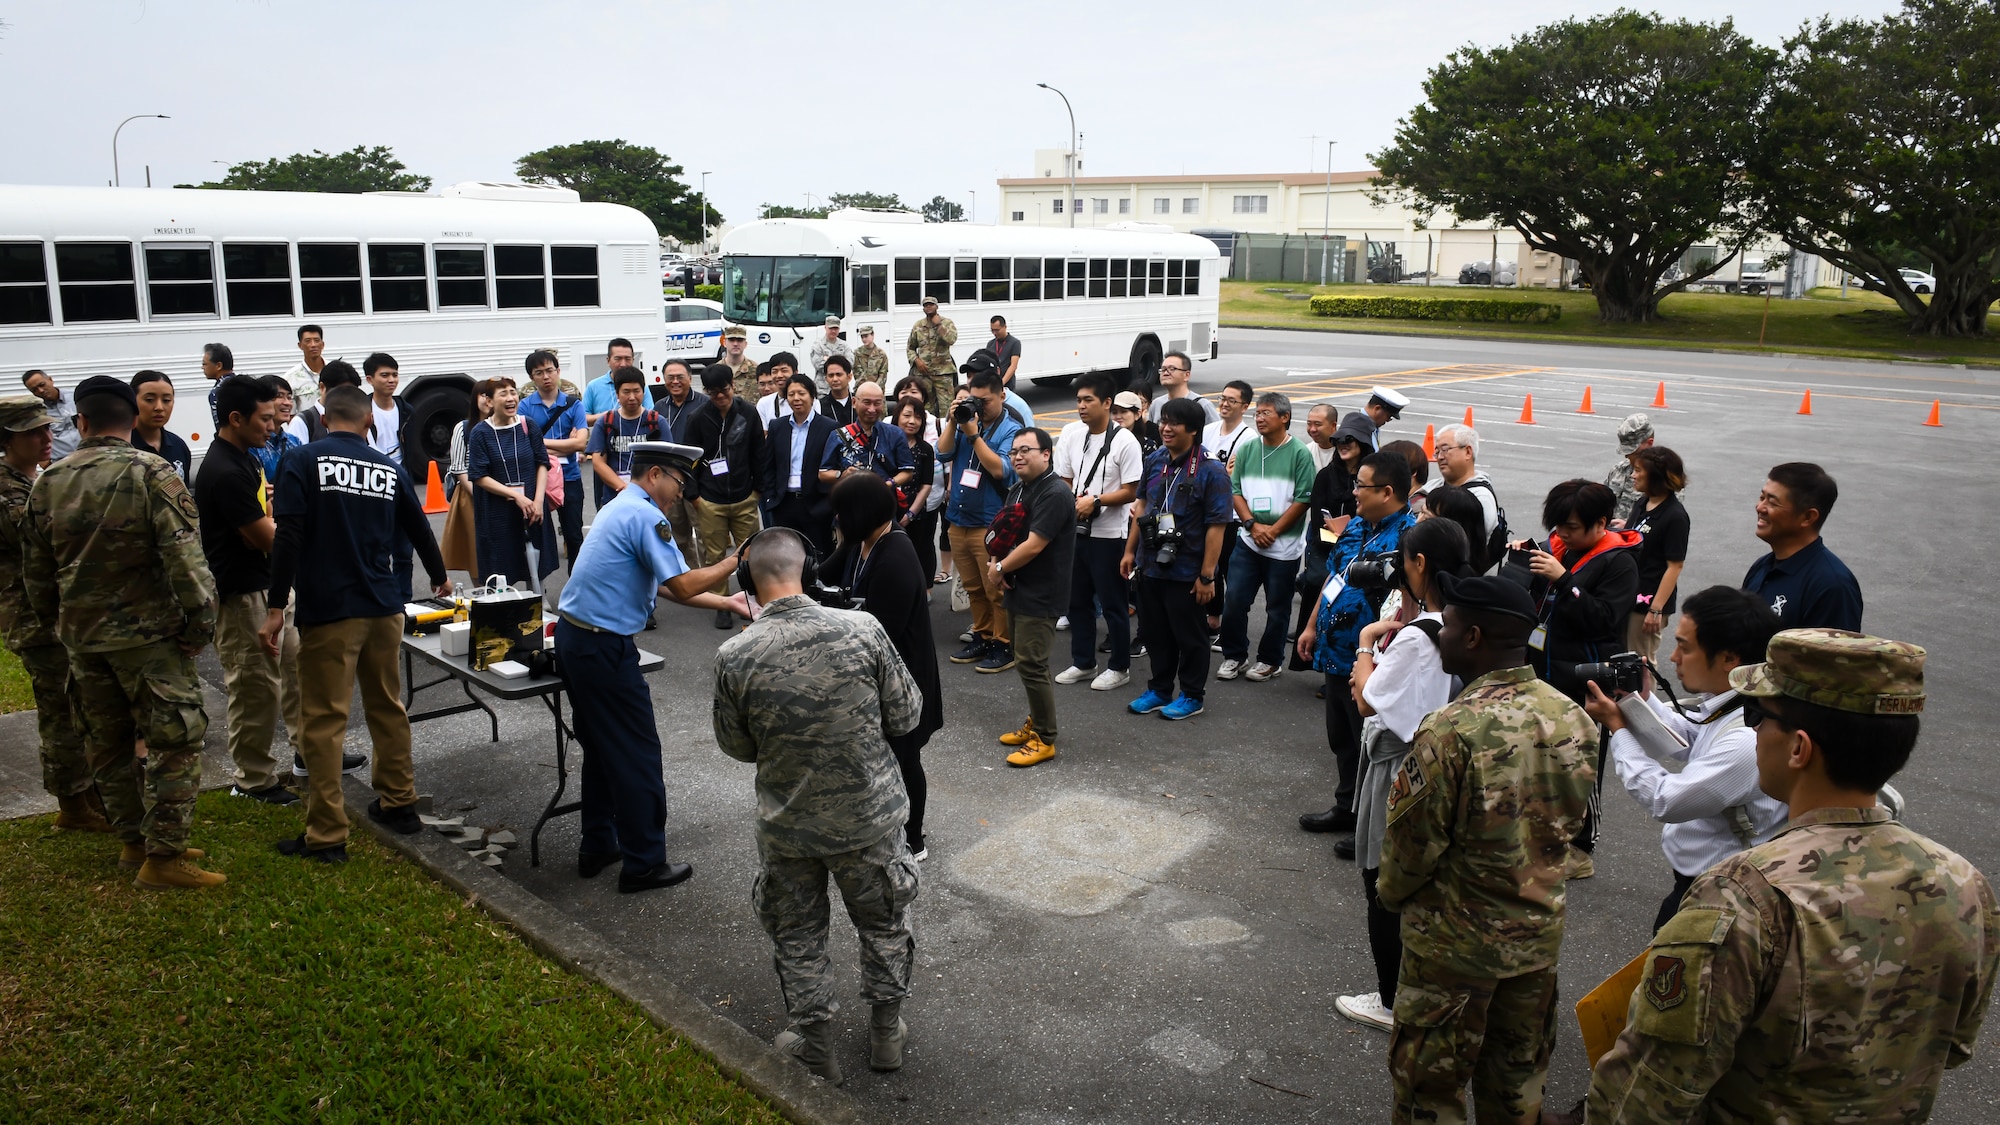 18th Security Forces Squadron defenders and members of Okinawa Prefectural Police perform a demonstration for visitors hosted by 18th Wing Public Affairs during the Twitter Tour at Kadena Air Base, Japan, Nov. 4, 2019. The defenders and local police described how they work together to handle and prevent drunken driving incidents. (U.S. Air Force photo by Staff Sgt. Benjamin Raughton)